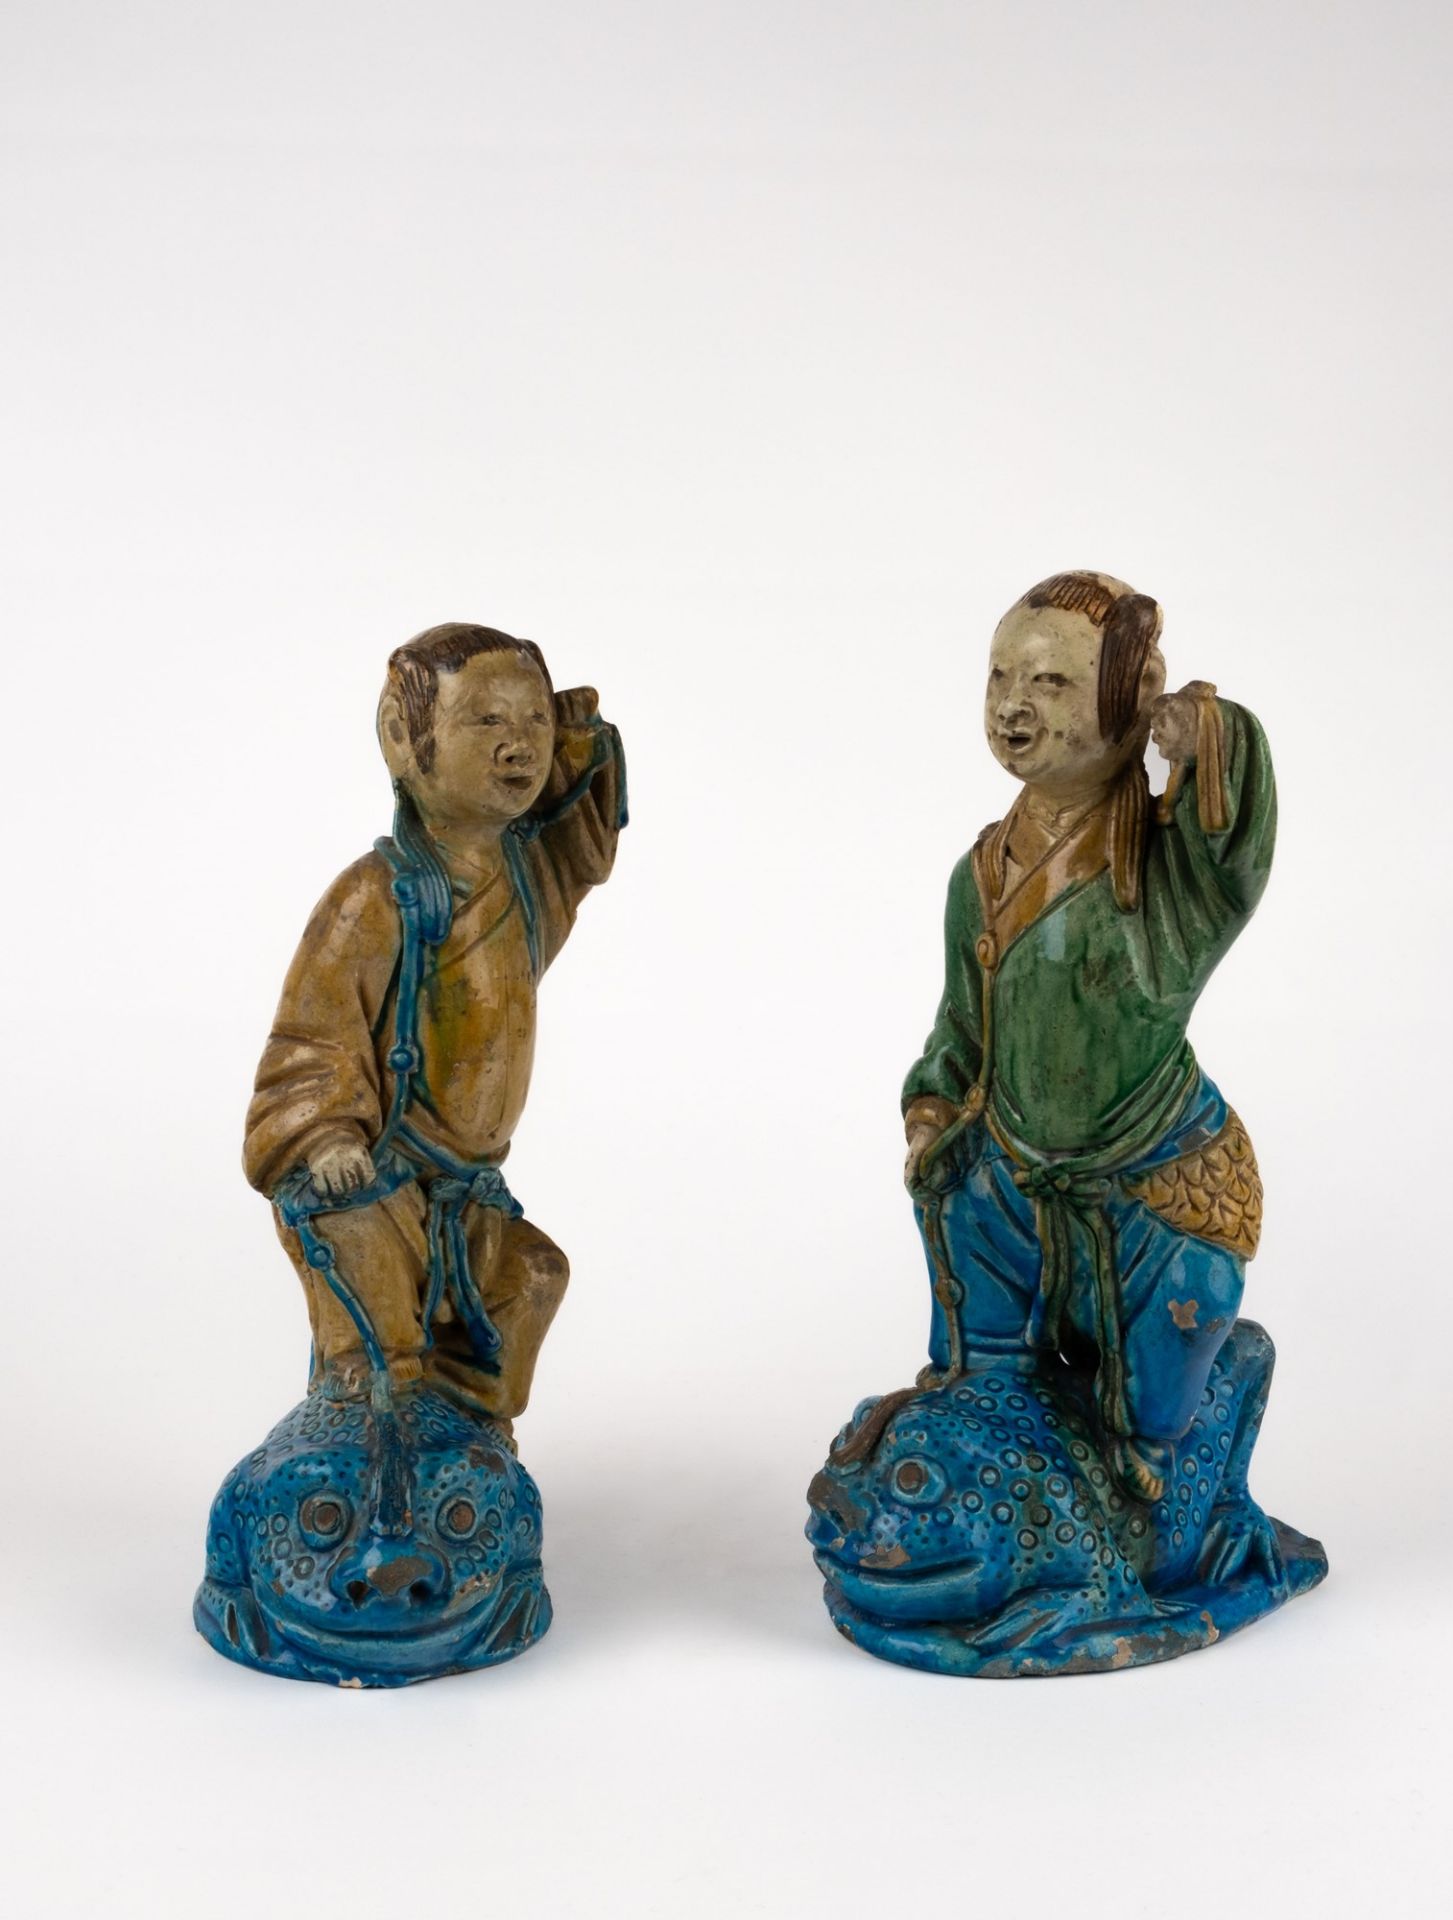 A pair of figures standing on frogs. China, 19th c.